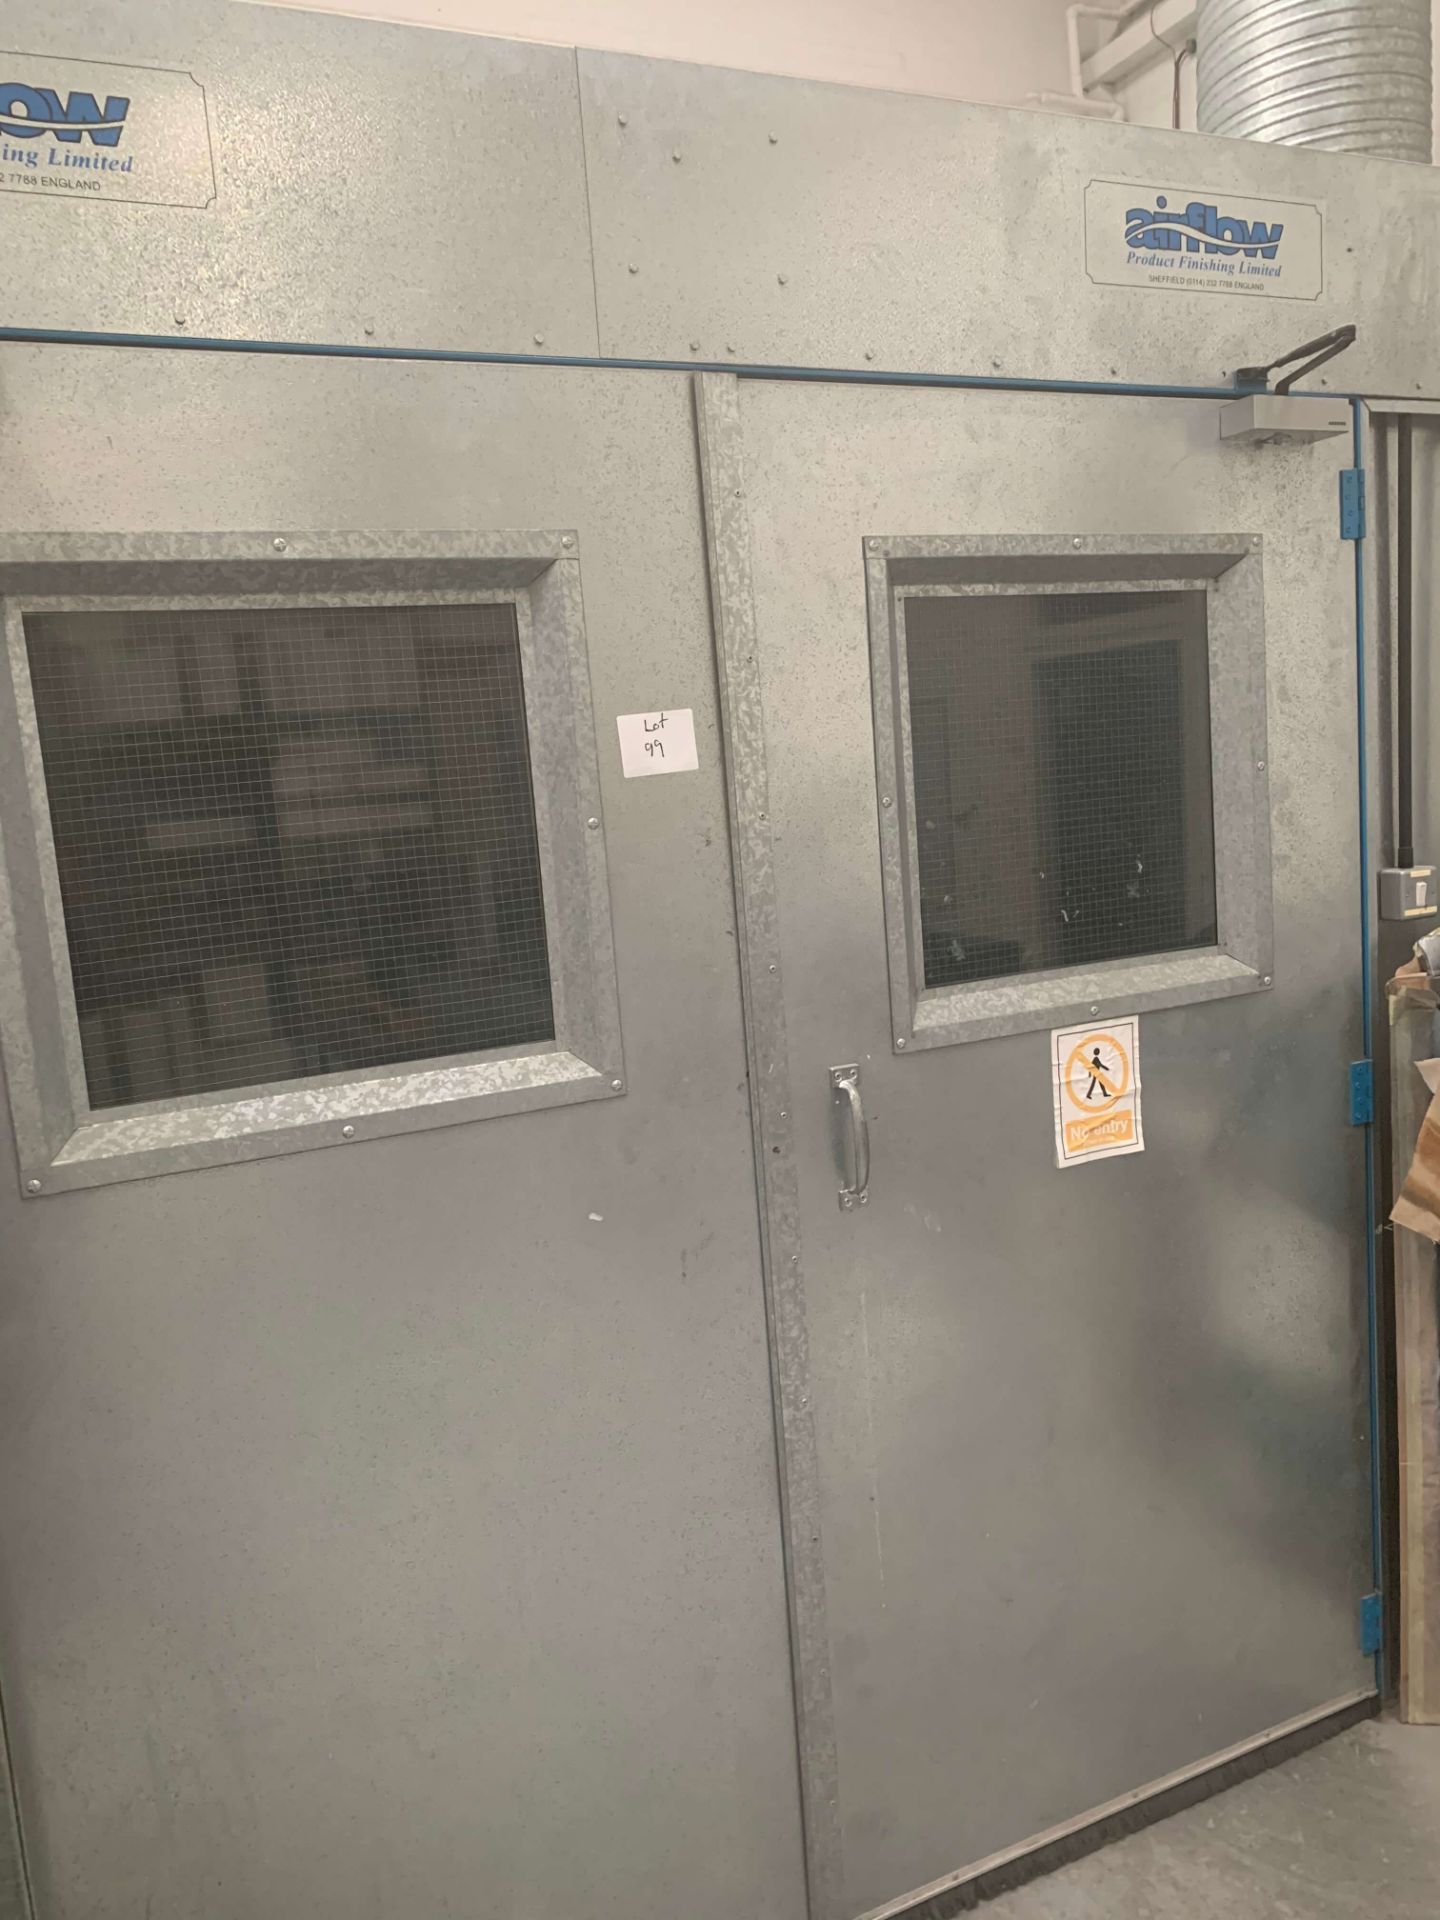 Airflow Product Finishing Ltd SPRAY BOOTH height 7.21ft, width 14.73ft, depth 10.53ft